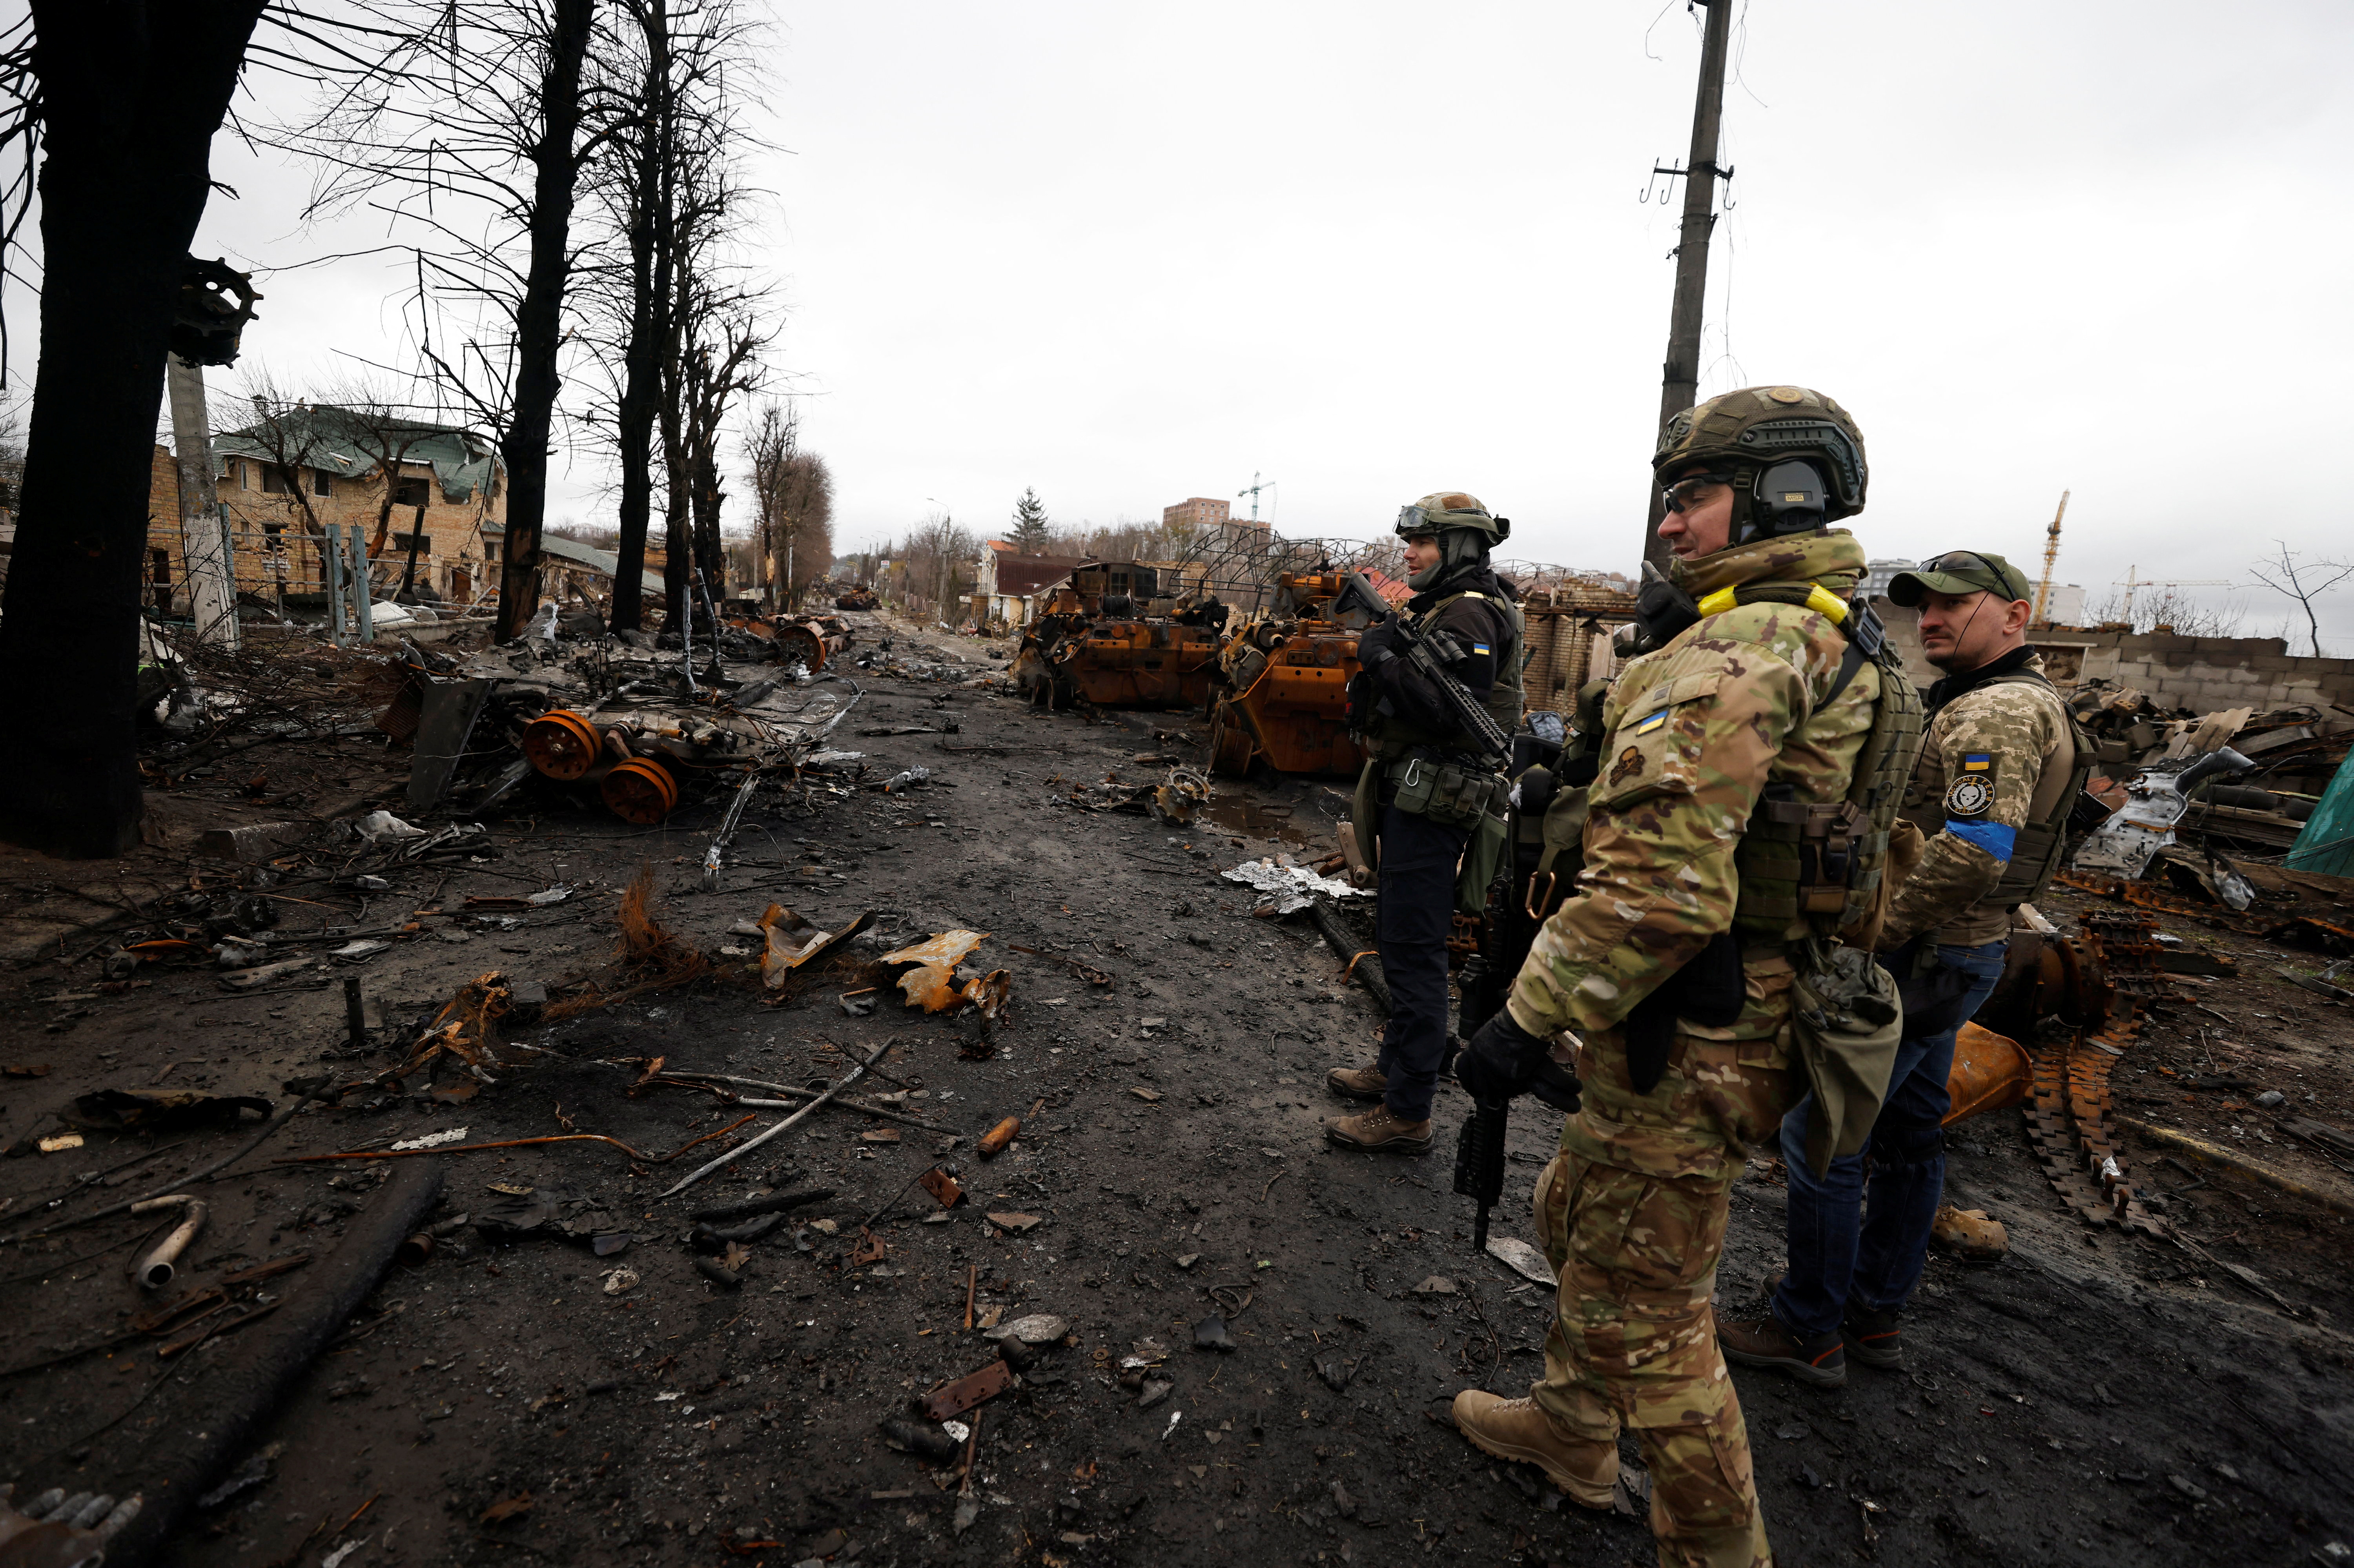 Soldiers walk to see destroyed Russian military vehicles, amid Russia's invasion on Ukraine in Bucha, in Kyiv region